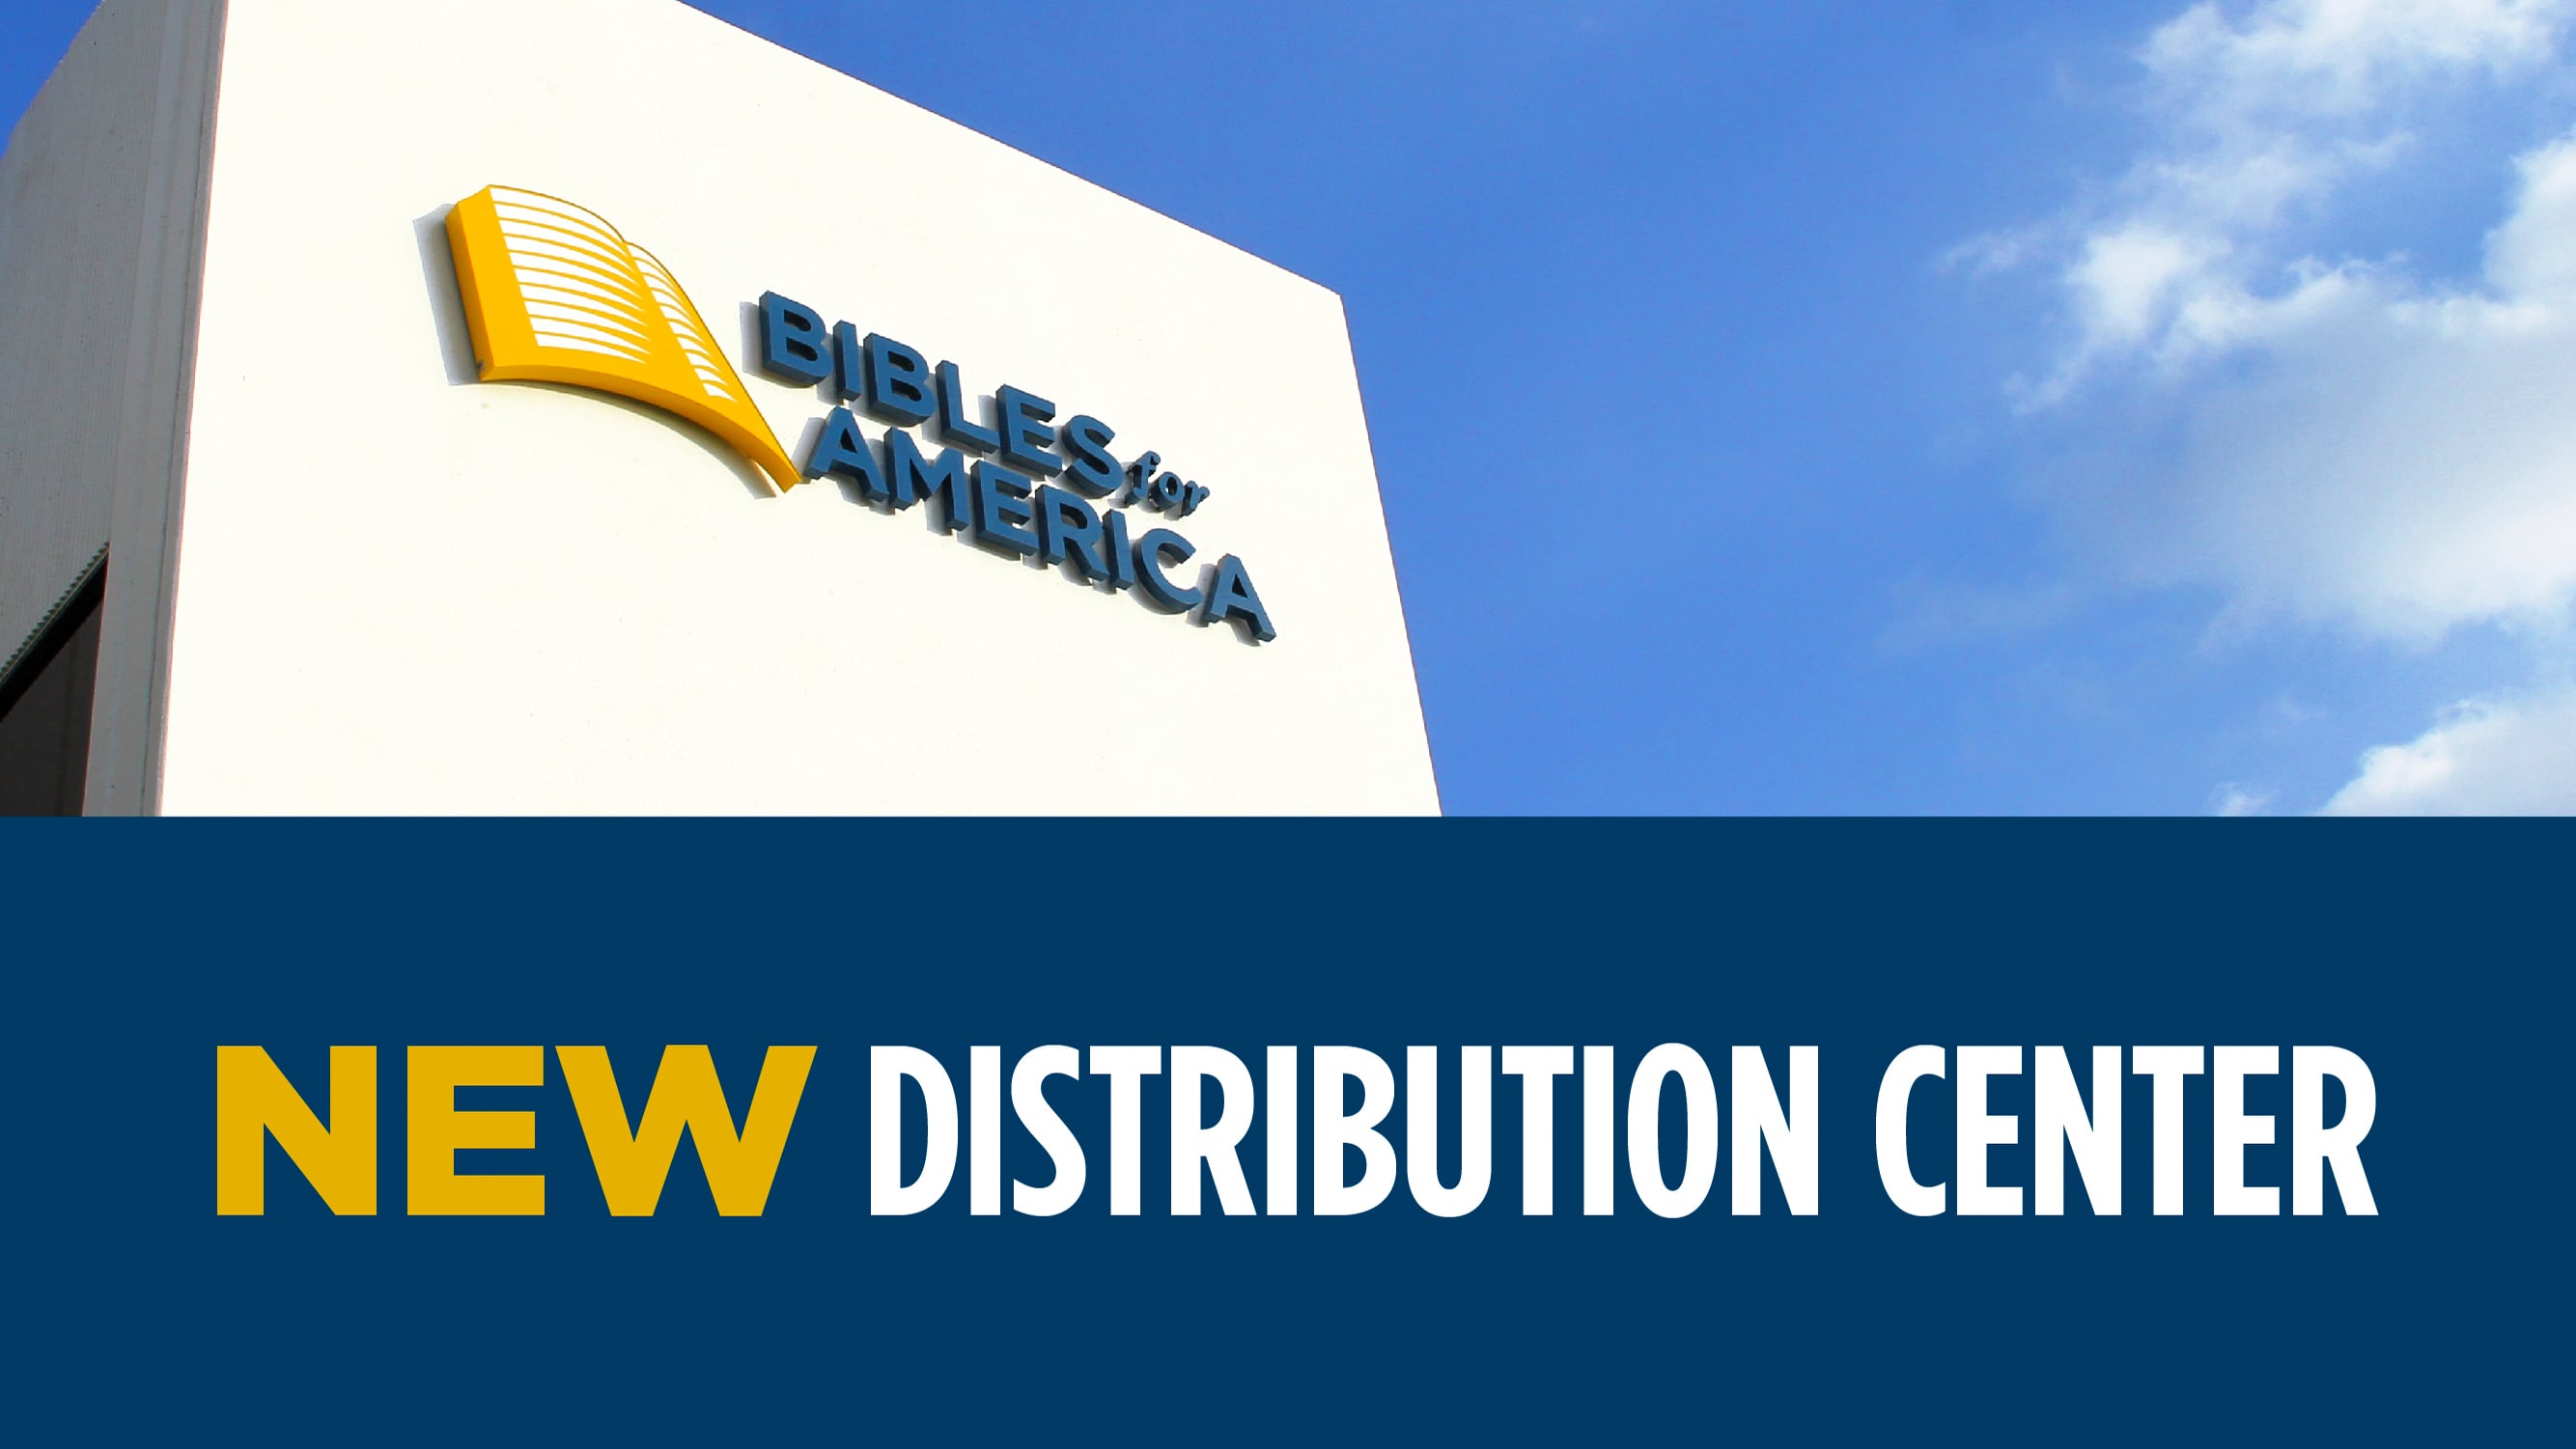 Behind the Scenes at the New Bibles for America Distribution Center